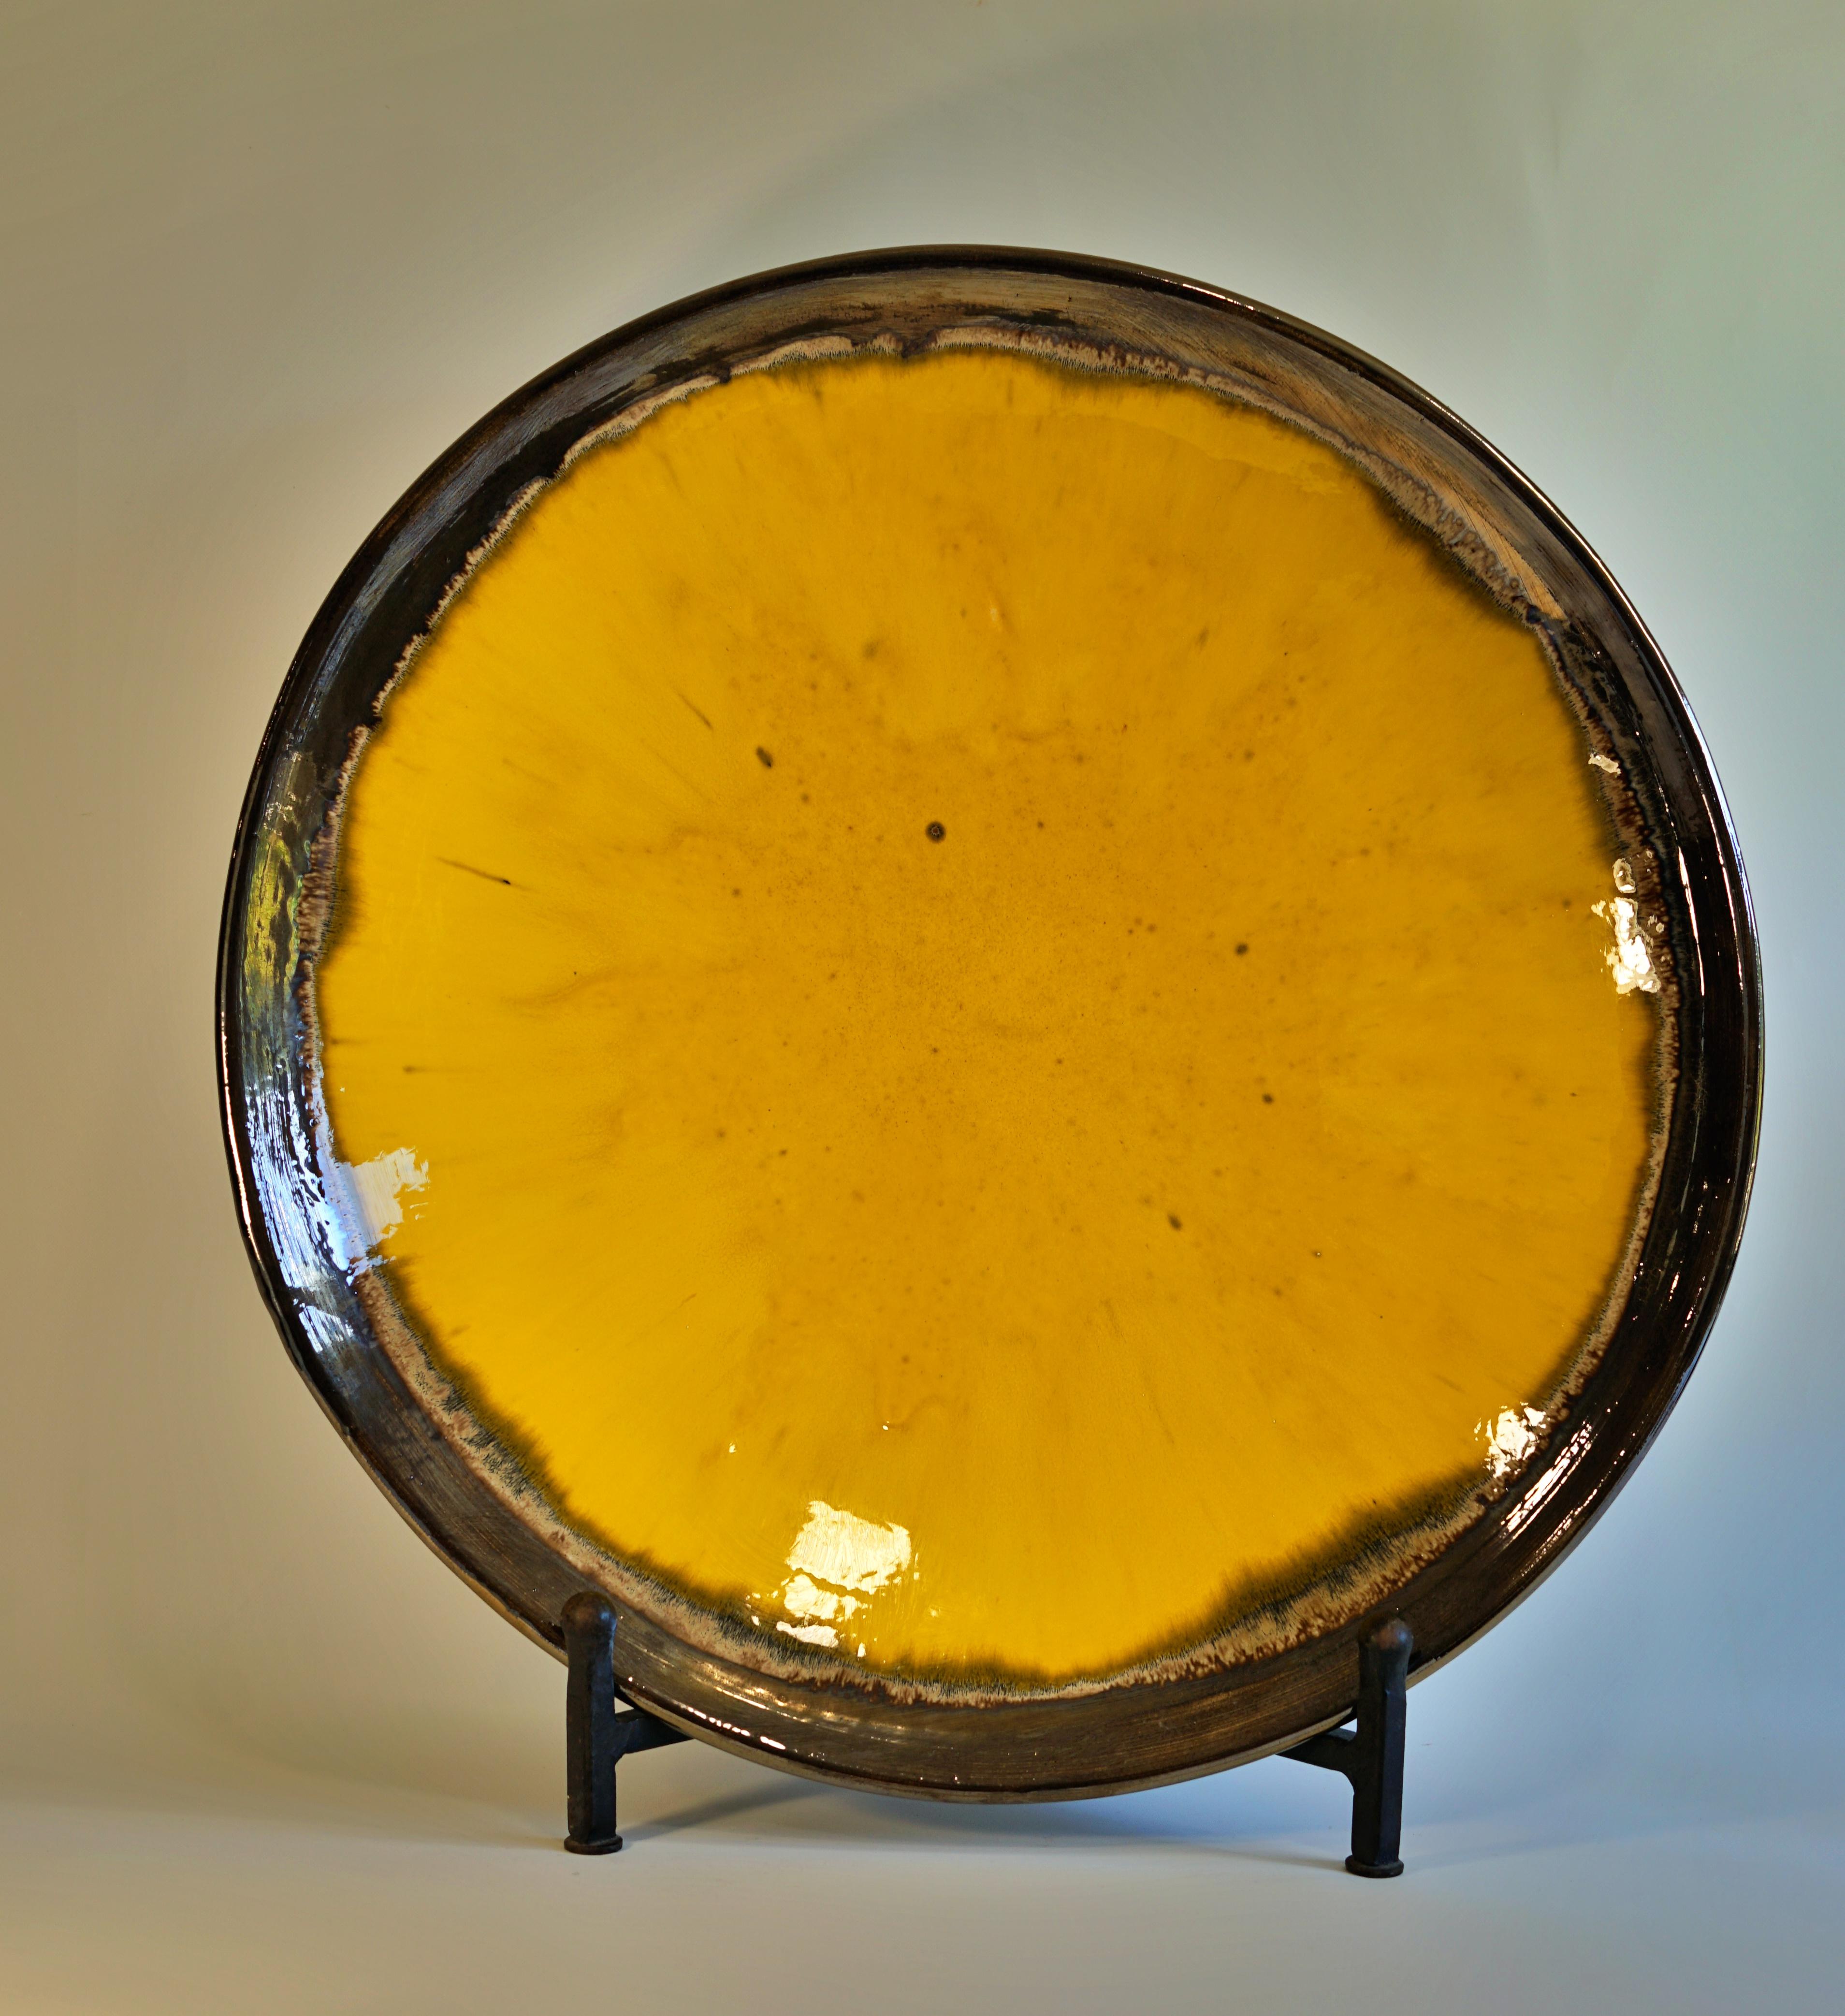 New hand made ceramic plate
Code: Yellow plate
Plates: Stoneware pottery
Size .: 60cm 
Weight.: 3.5kg
This piece is for decorative purposes, is not suitable for food uses.
Every single piece is handmade and unique
Availability: Available.

 